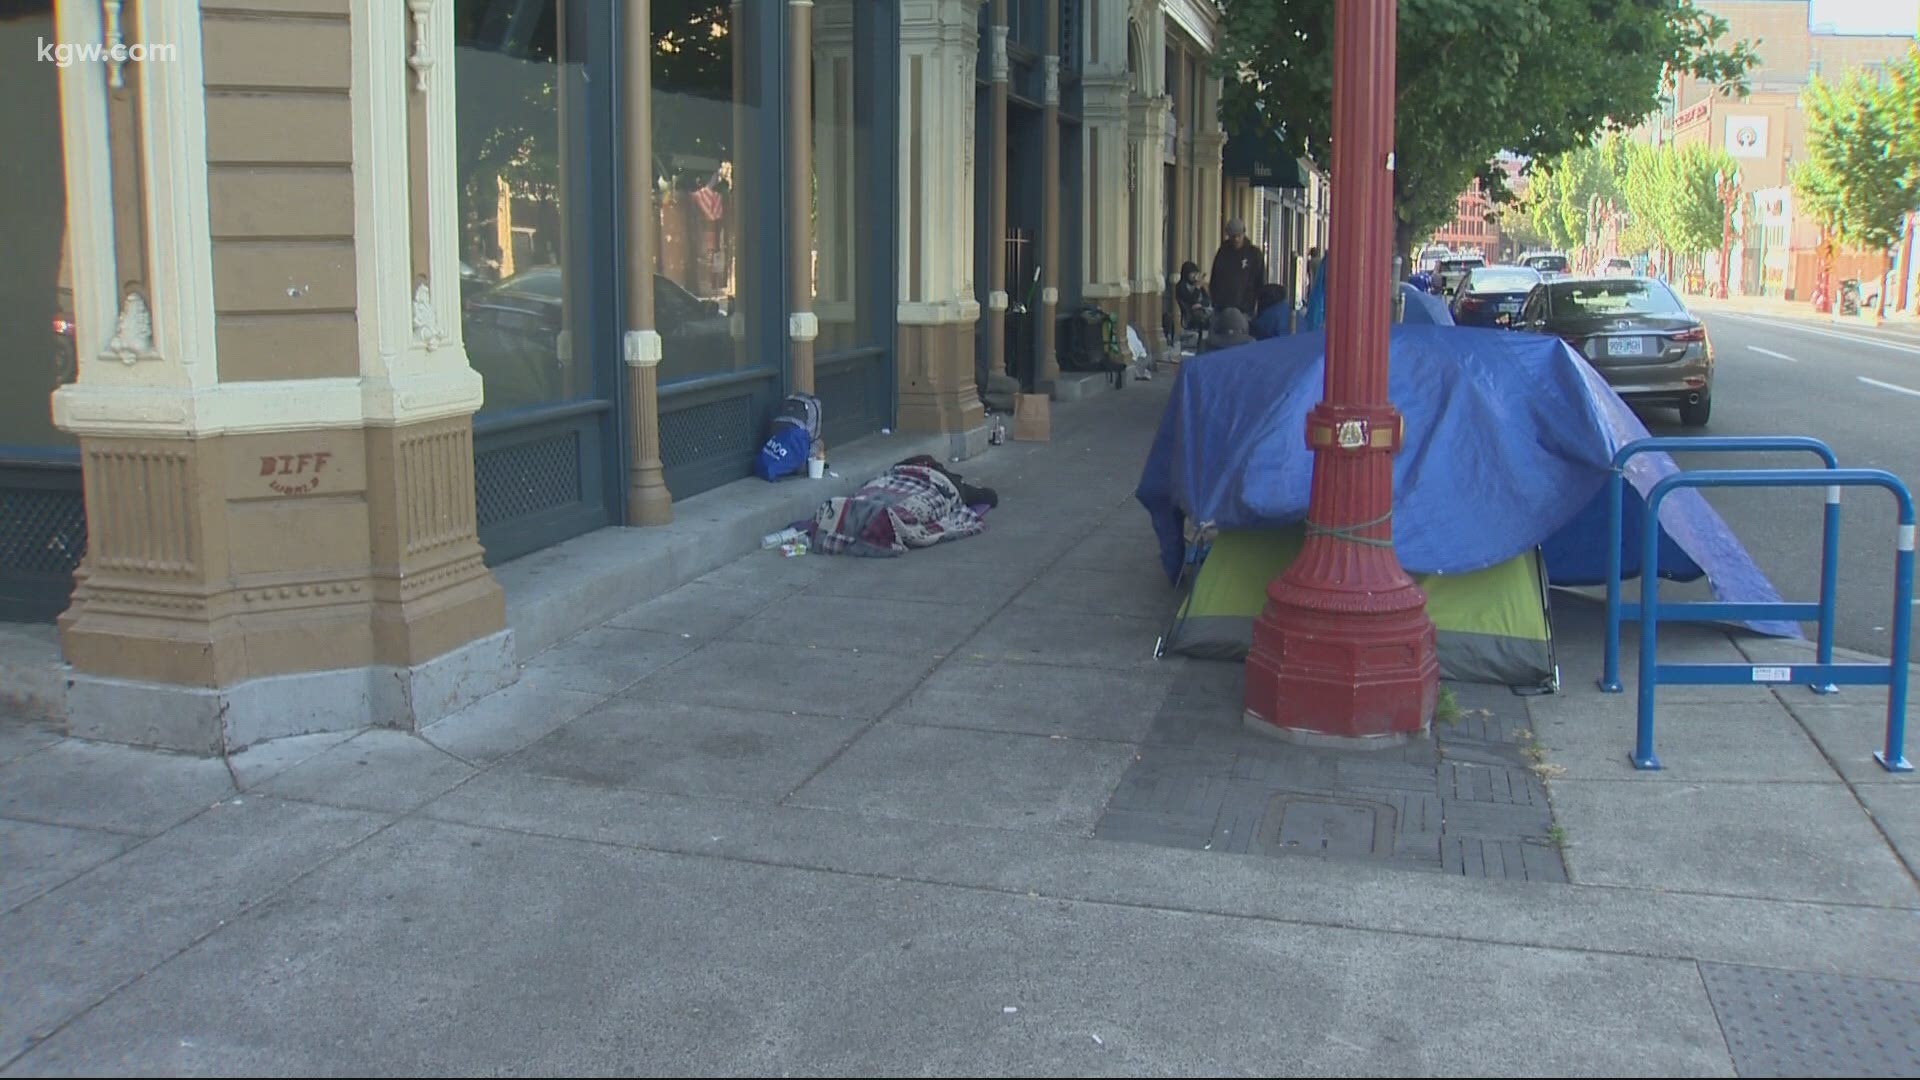 A new report shows more homeless people are dying on the streets of Multnomah County.